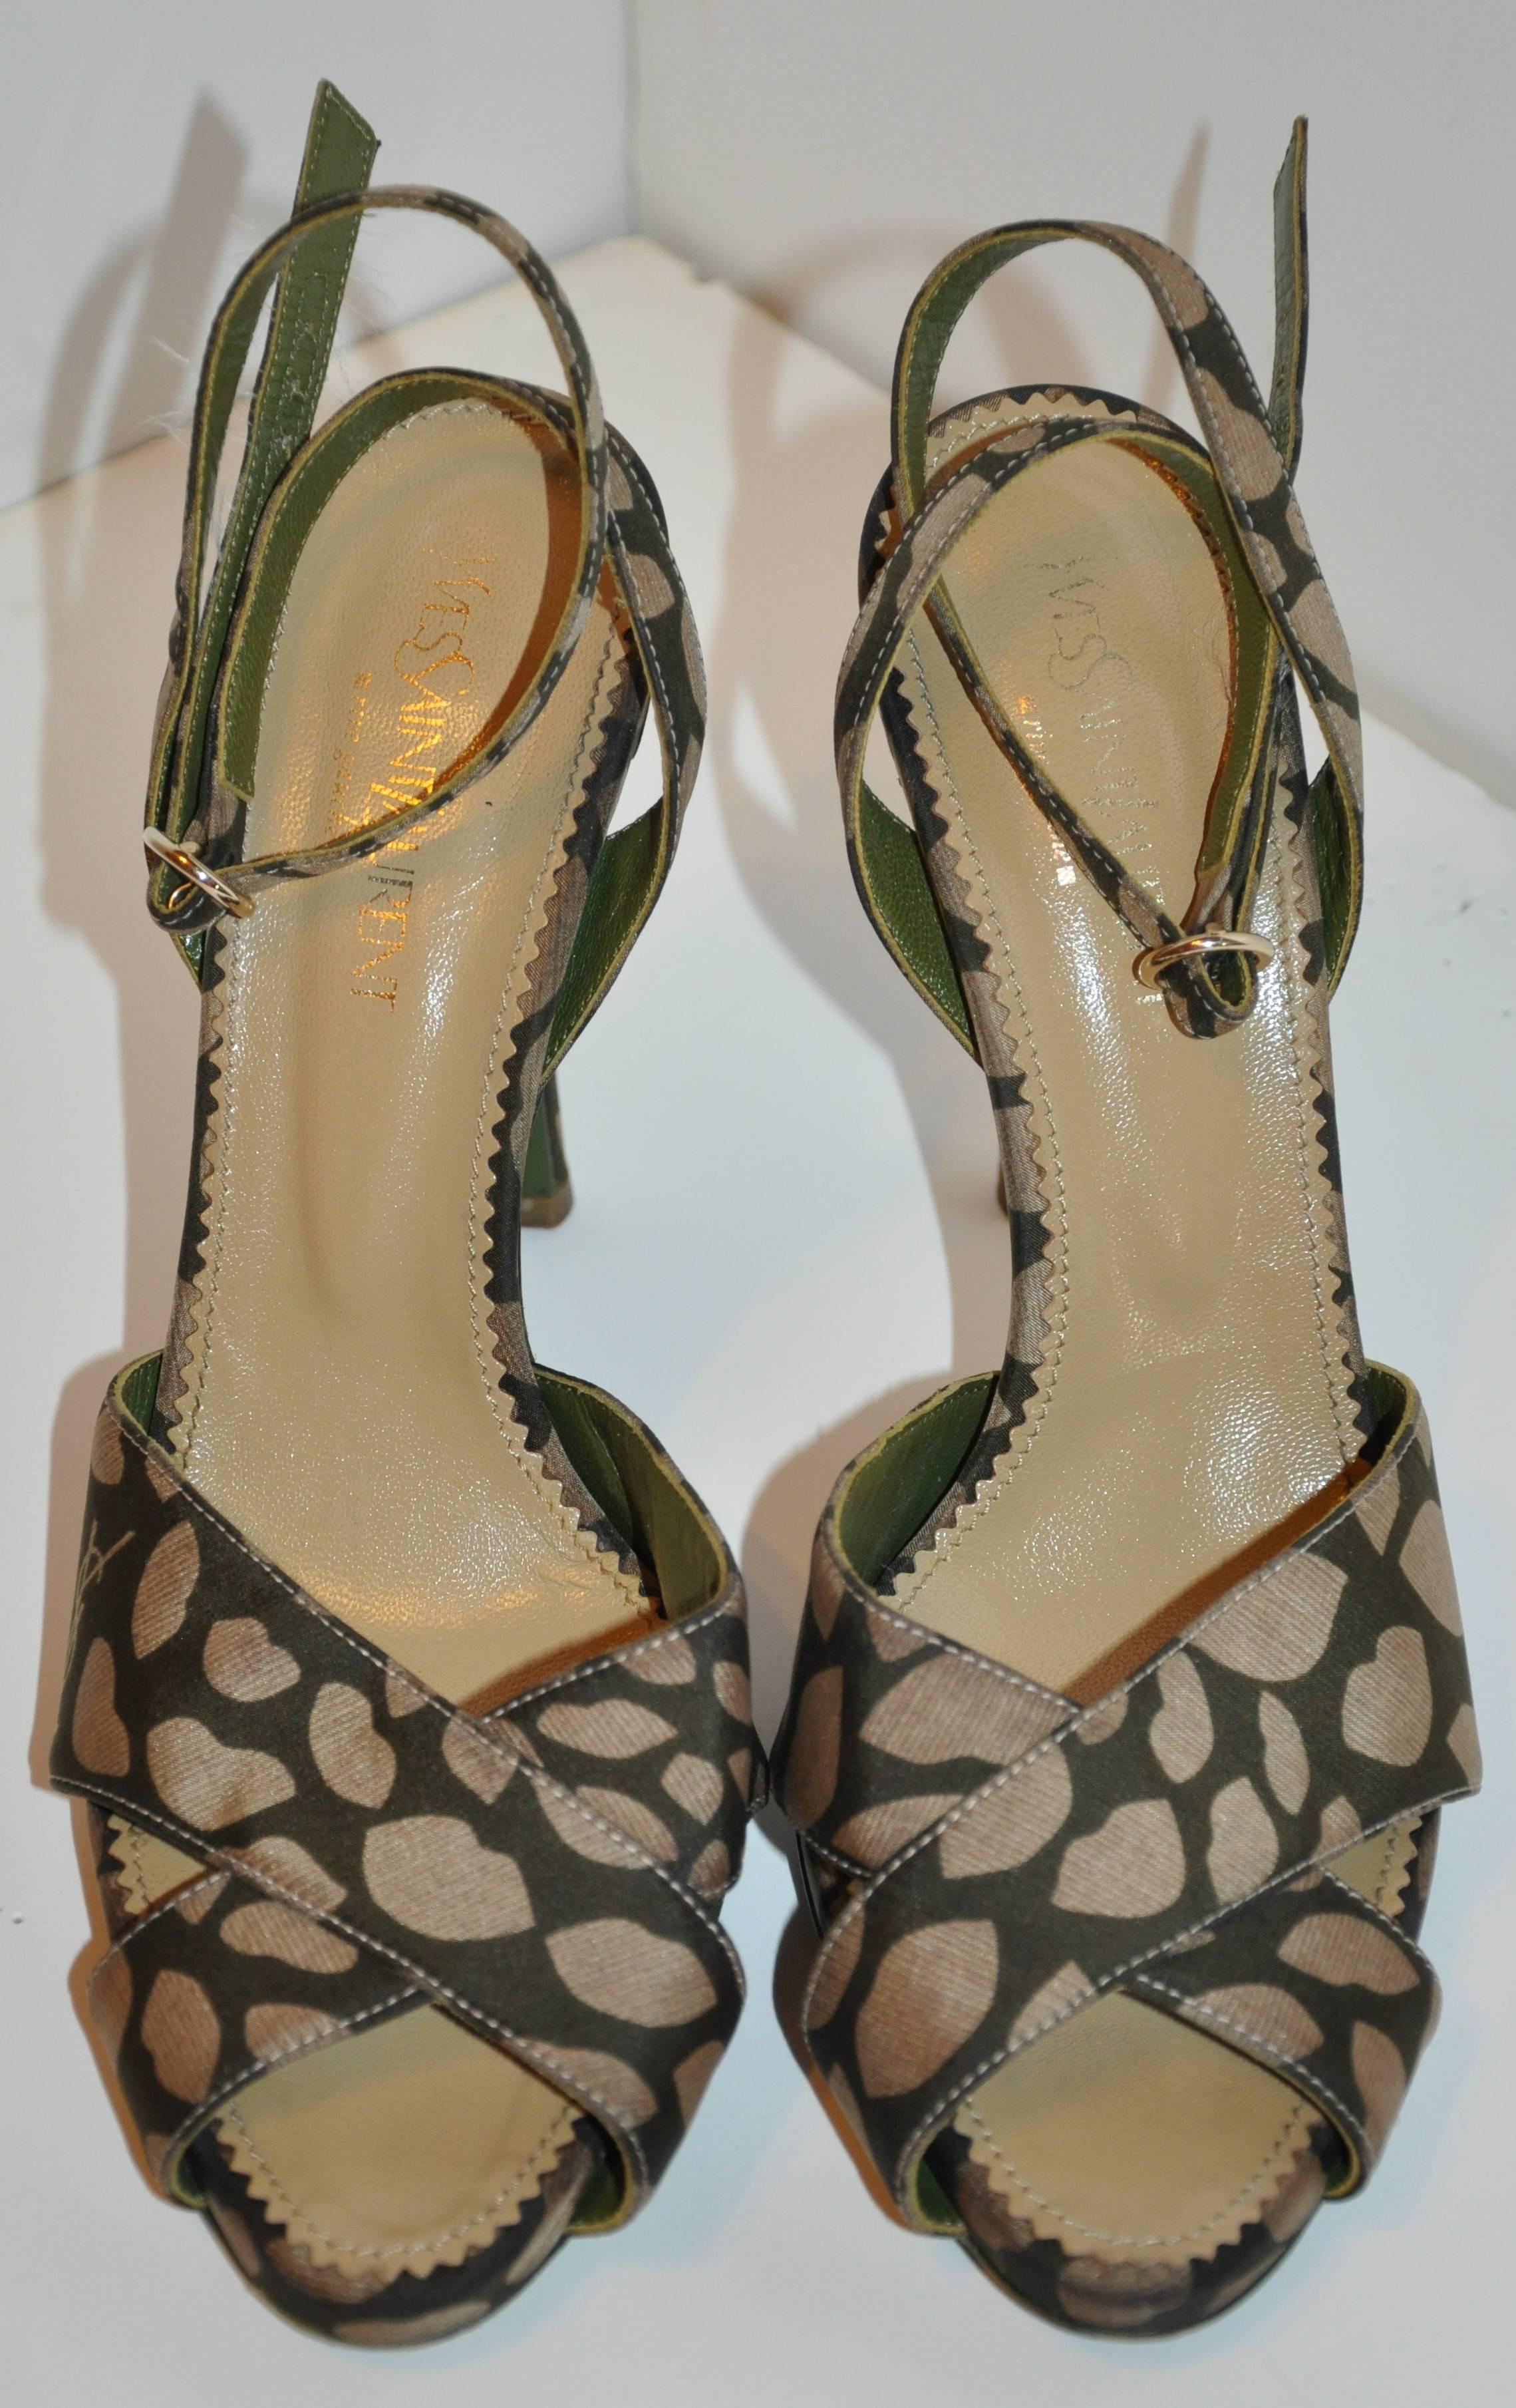        Yves Saint Laurent sexy, yet elegant olive Lips & Kisses ankle-strap sandals has adjustable ankle straps accented with a polished gold hardware buckle. slightly platformed in front measuring 1/2 inch in height. The back heel measures 4 1/2